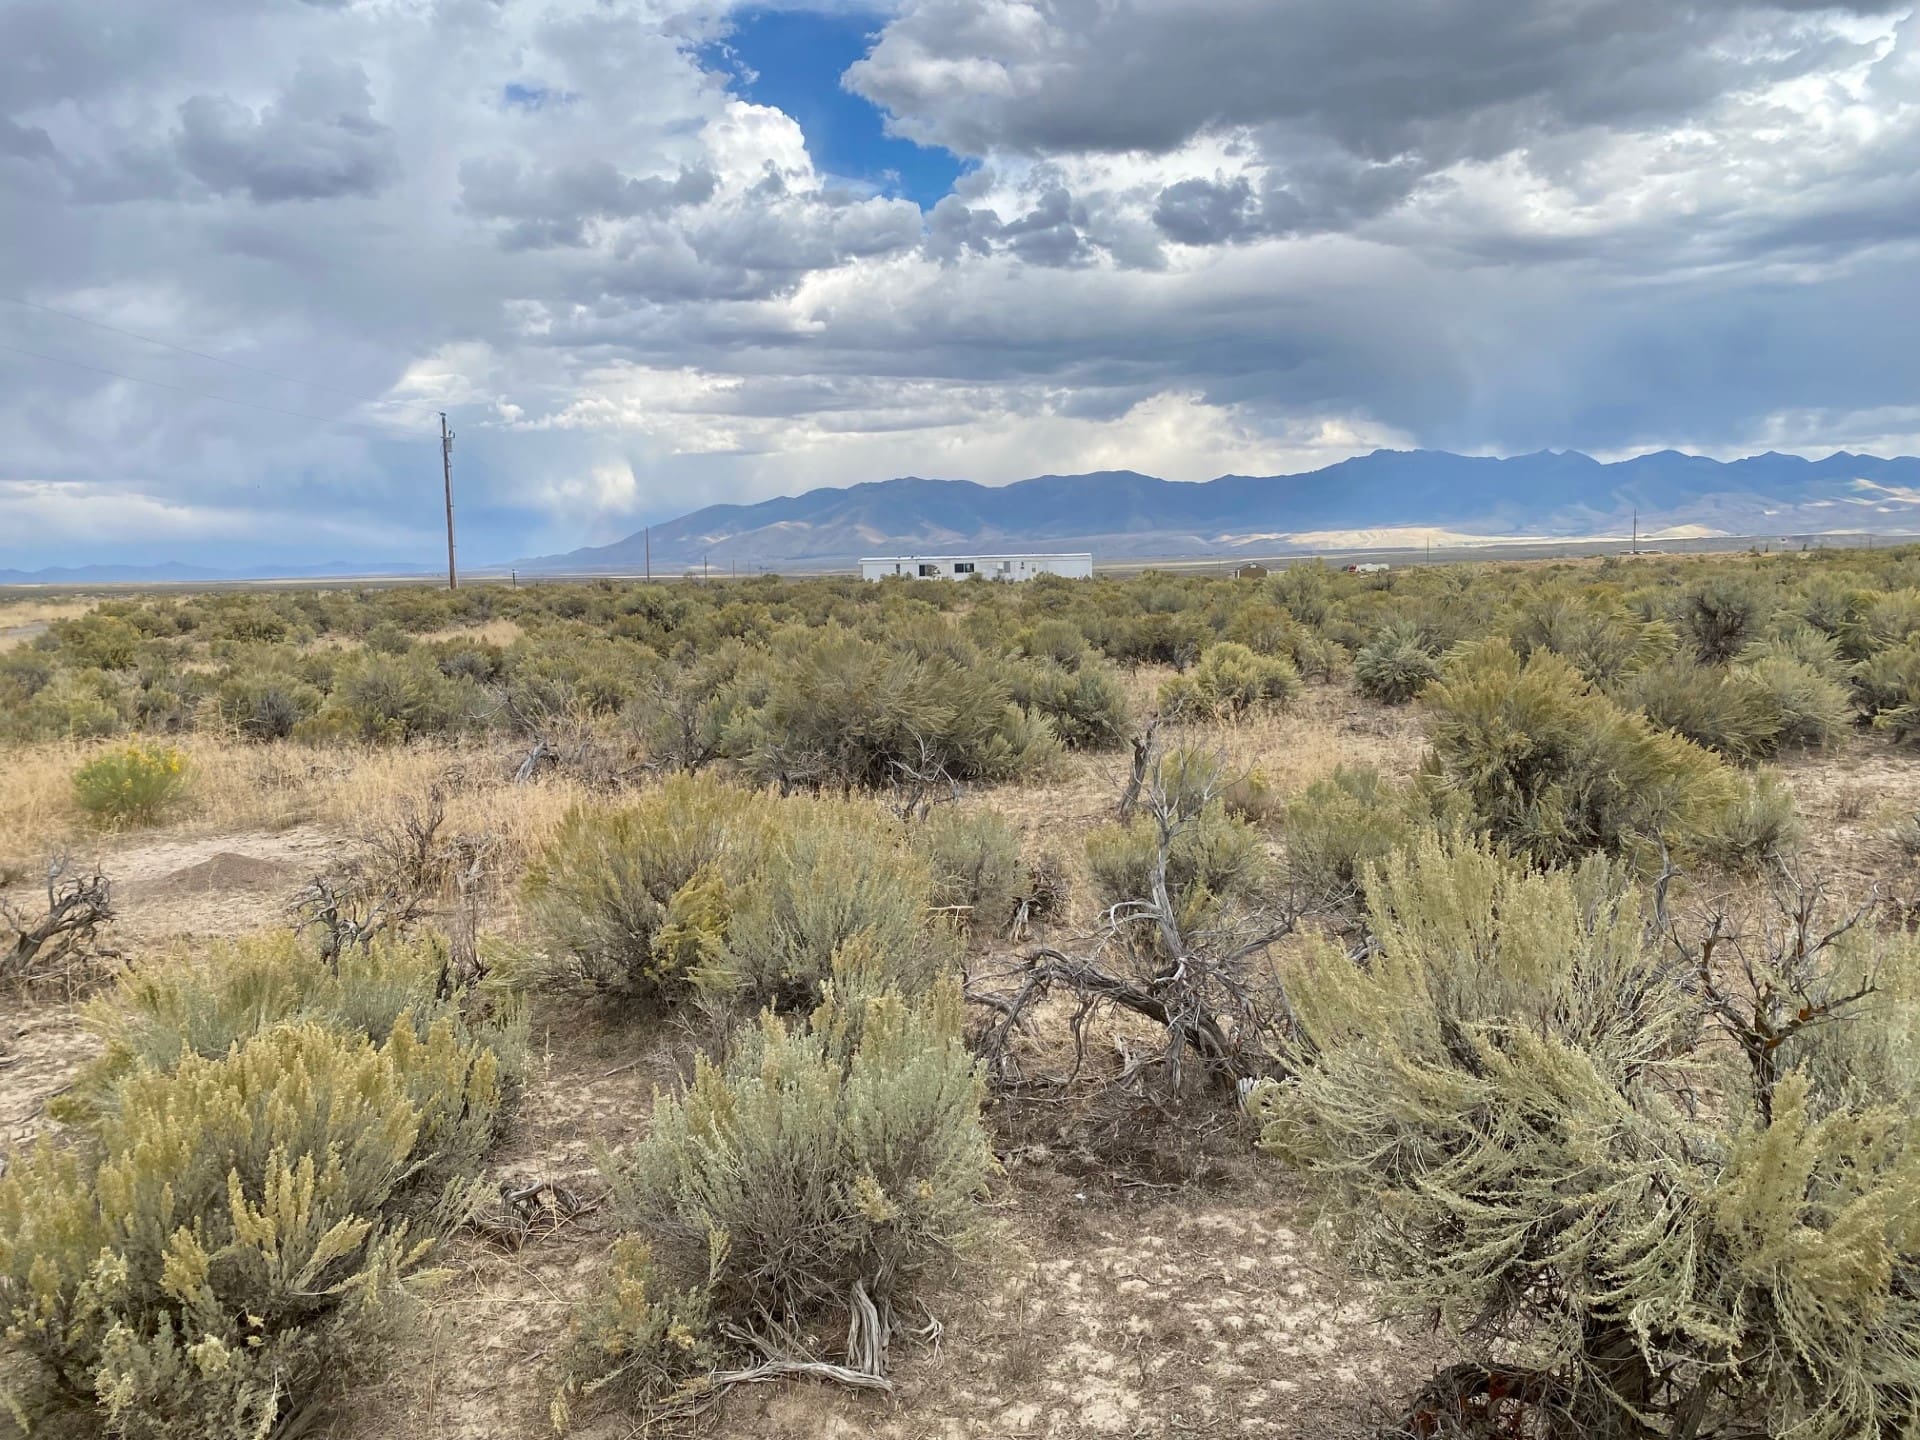 1.26 Acre Ranchette Elko Nevada With Fabulous Views Of The Ruby Mountains & Humboldt Peak 11,025 Ft photo 3